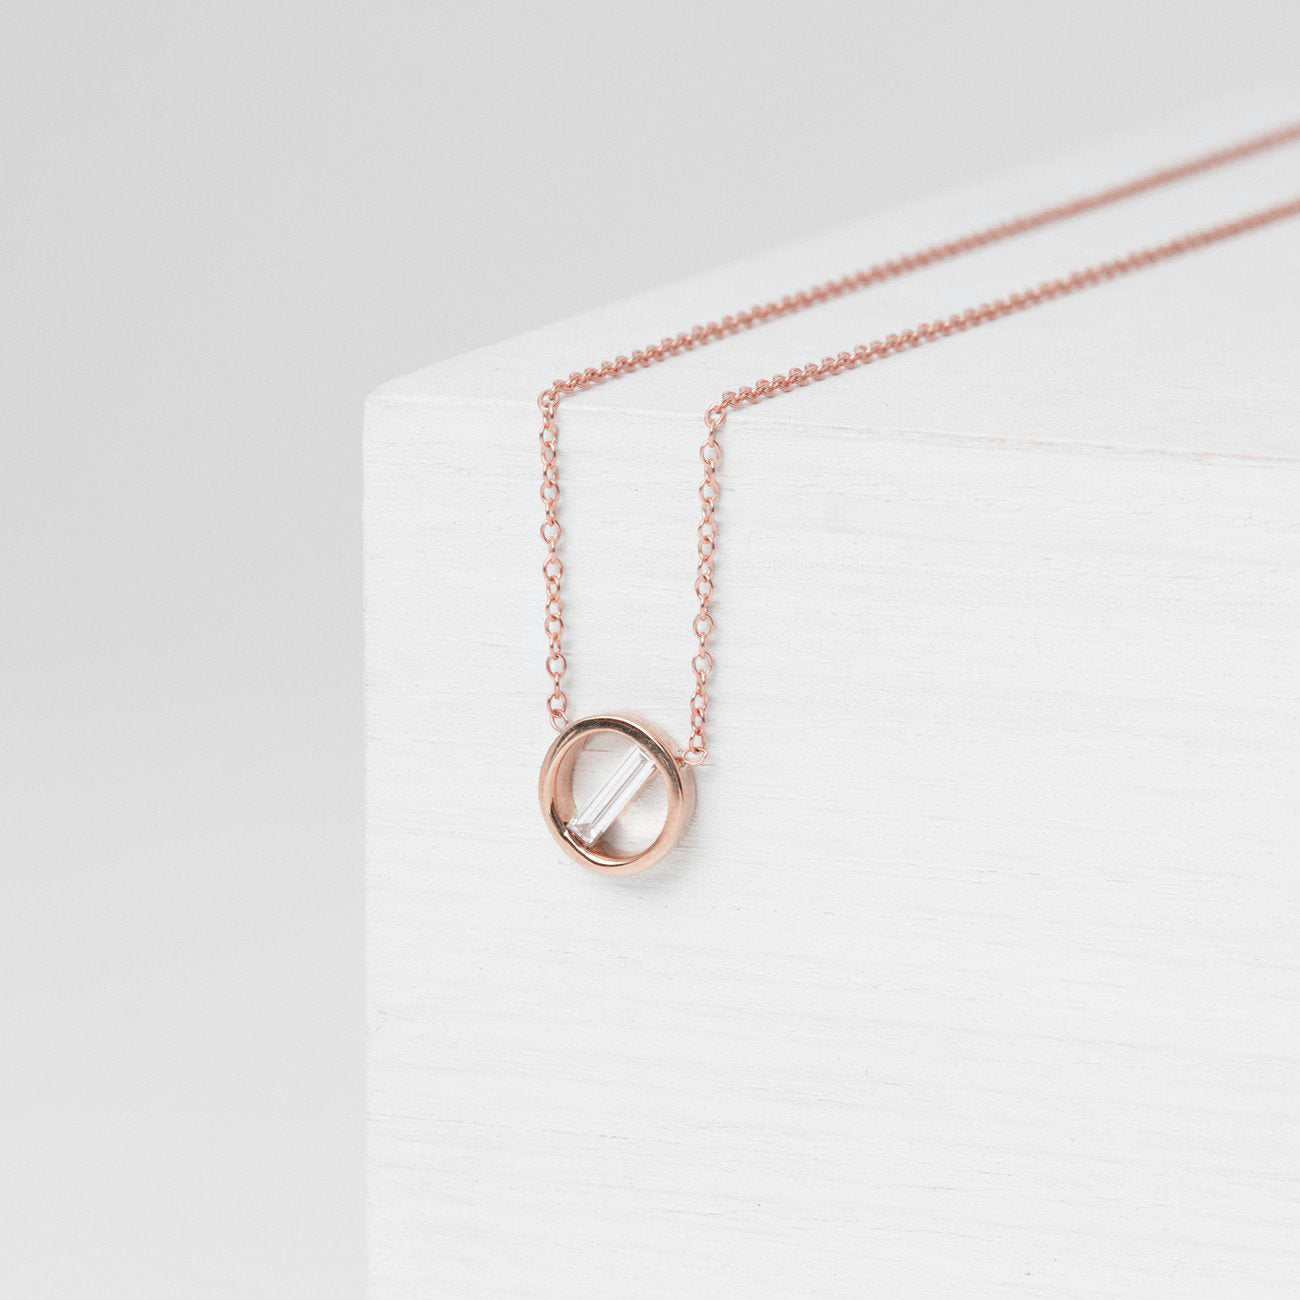 Lita Unique Necklace in 14k Rose Gold set with White Baguette Diamond By SHW Fine Jewelry NYC